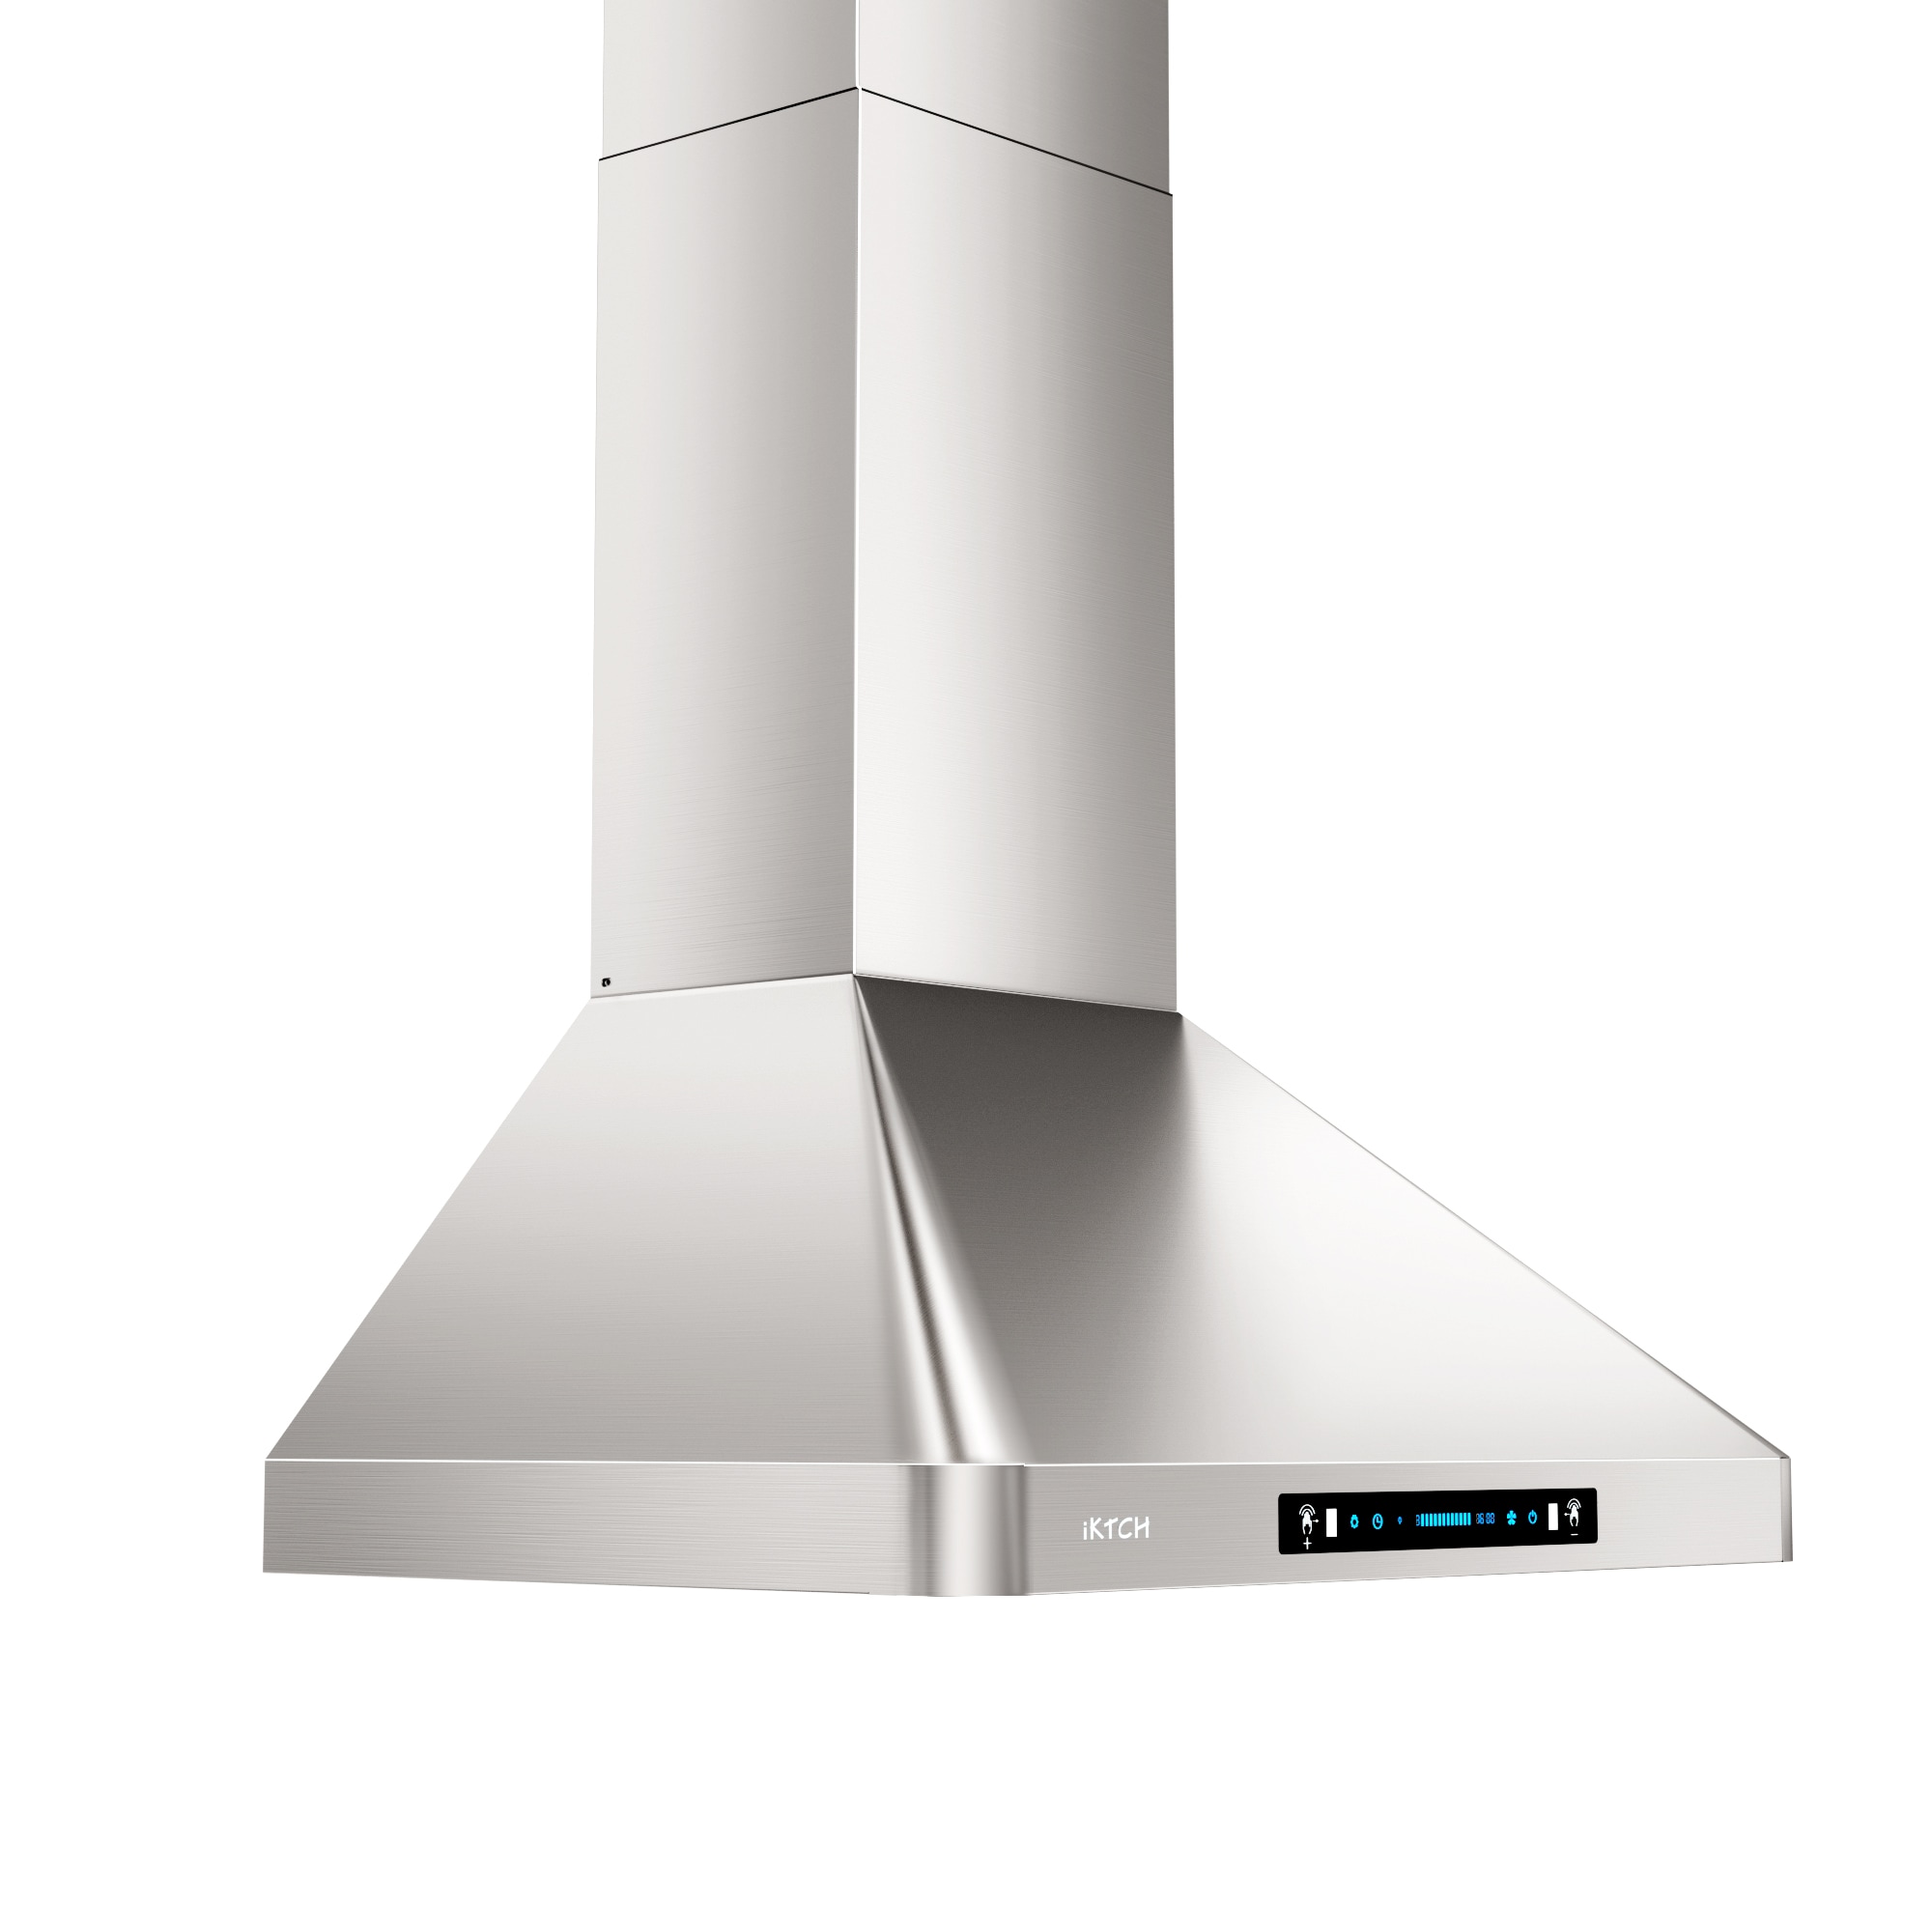 IKTCH 30-inch Wall Mount Range Hood 900 CFM Ducted/Ductless Convertible,  Kitchen Chimney Vent Stainless Steel with Gesture Sensing & Touch Control